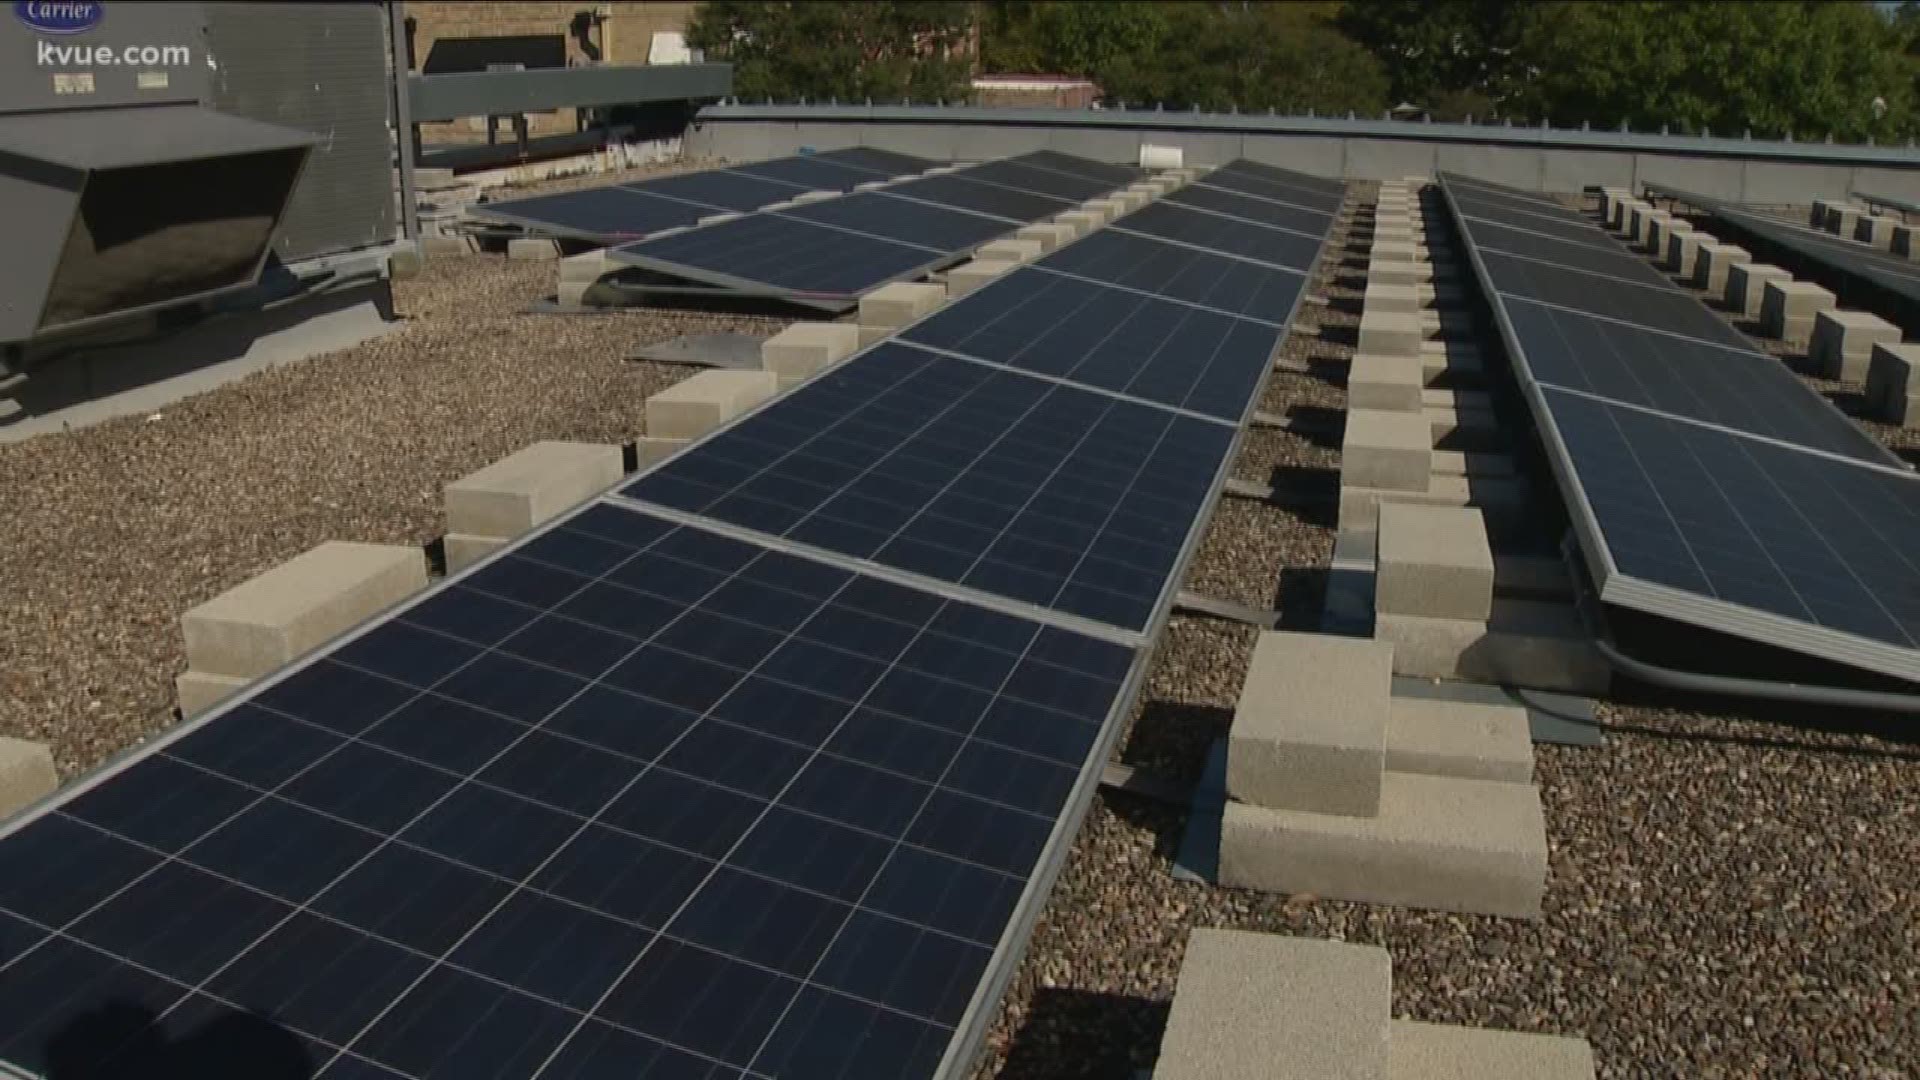 Austin could soon approve spending hundreds of millions of dollars for renewable energy.